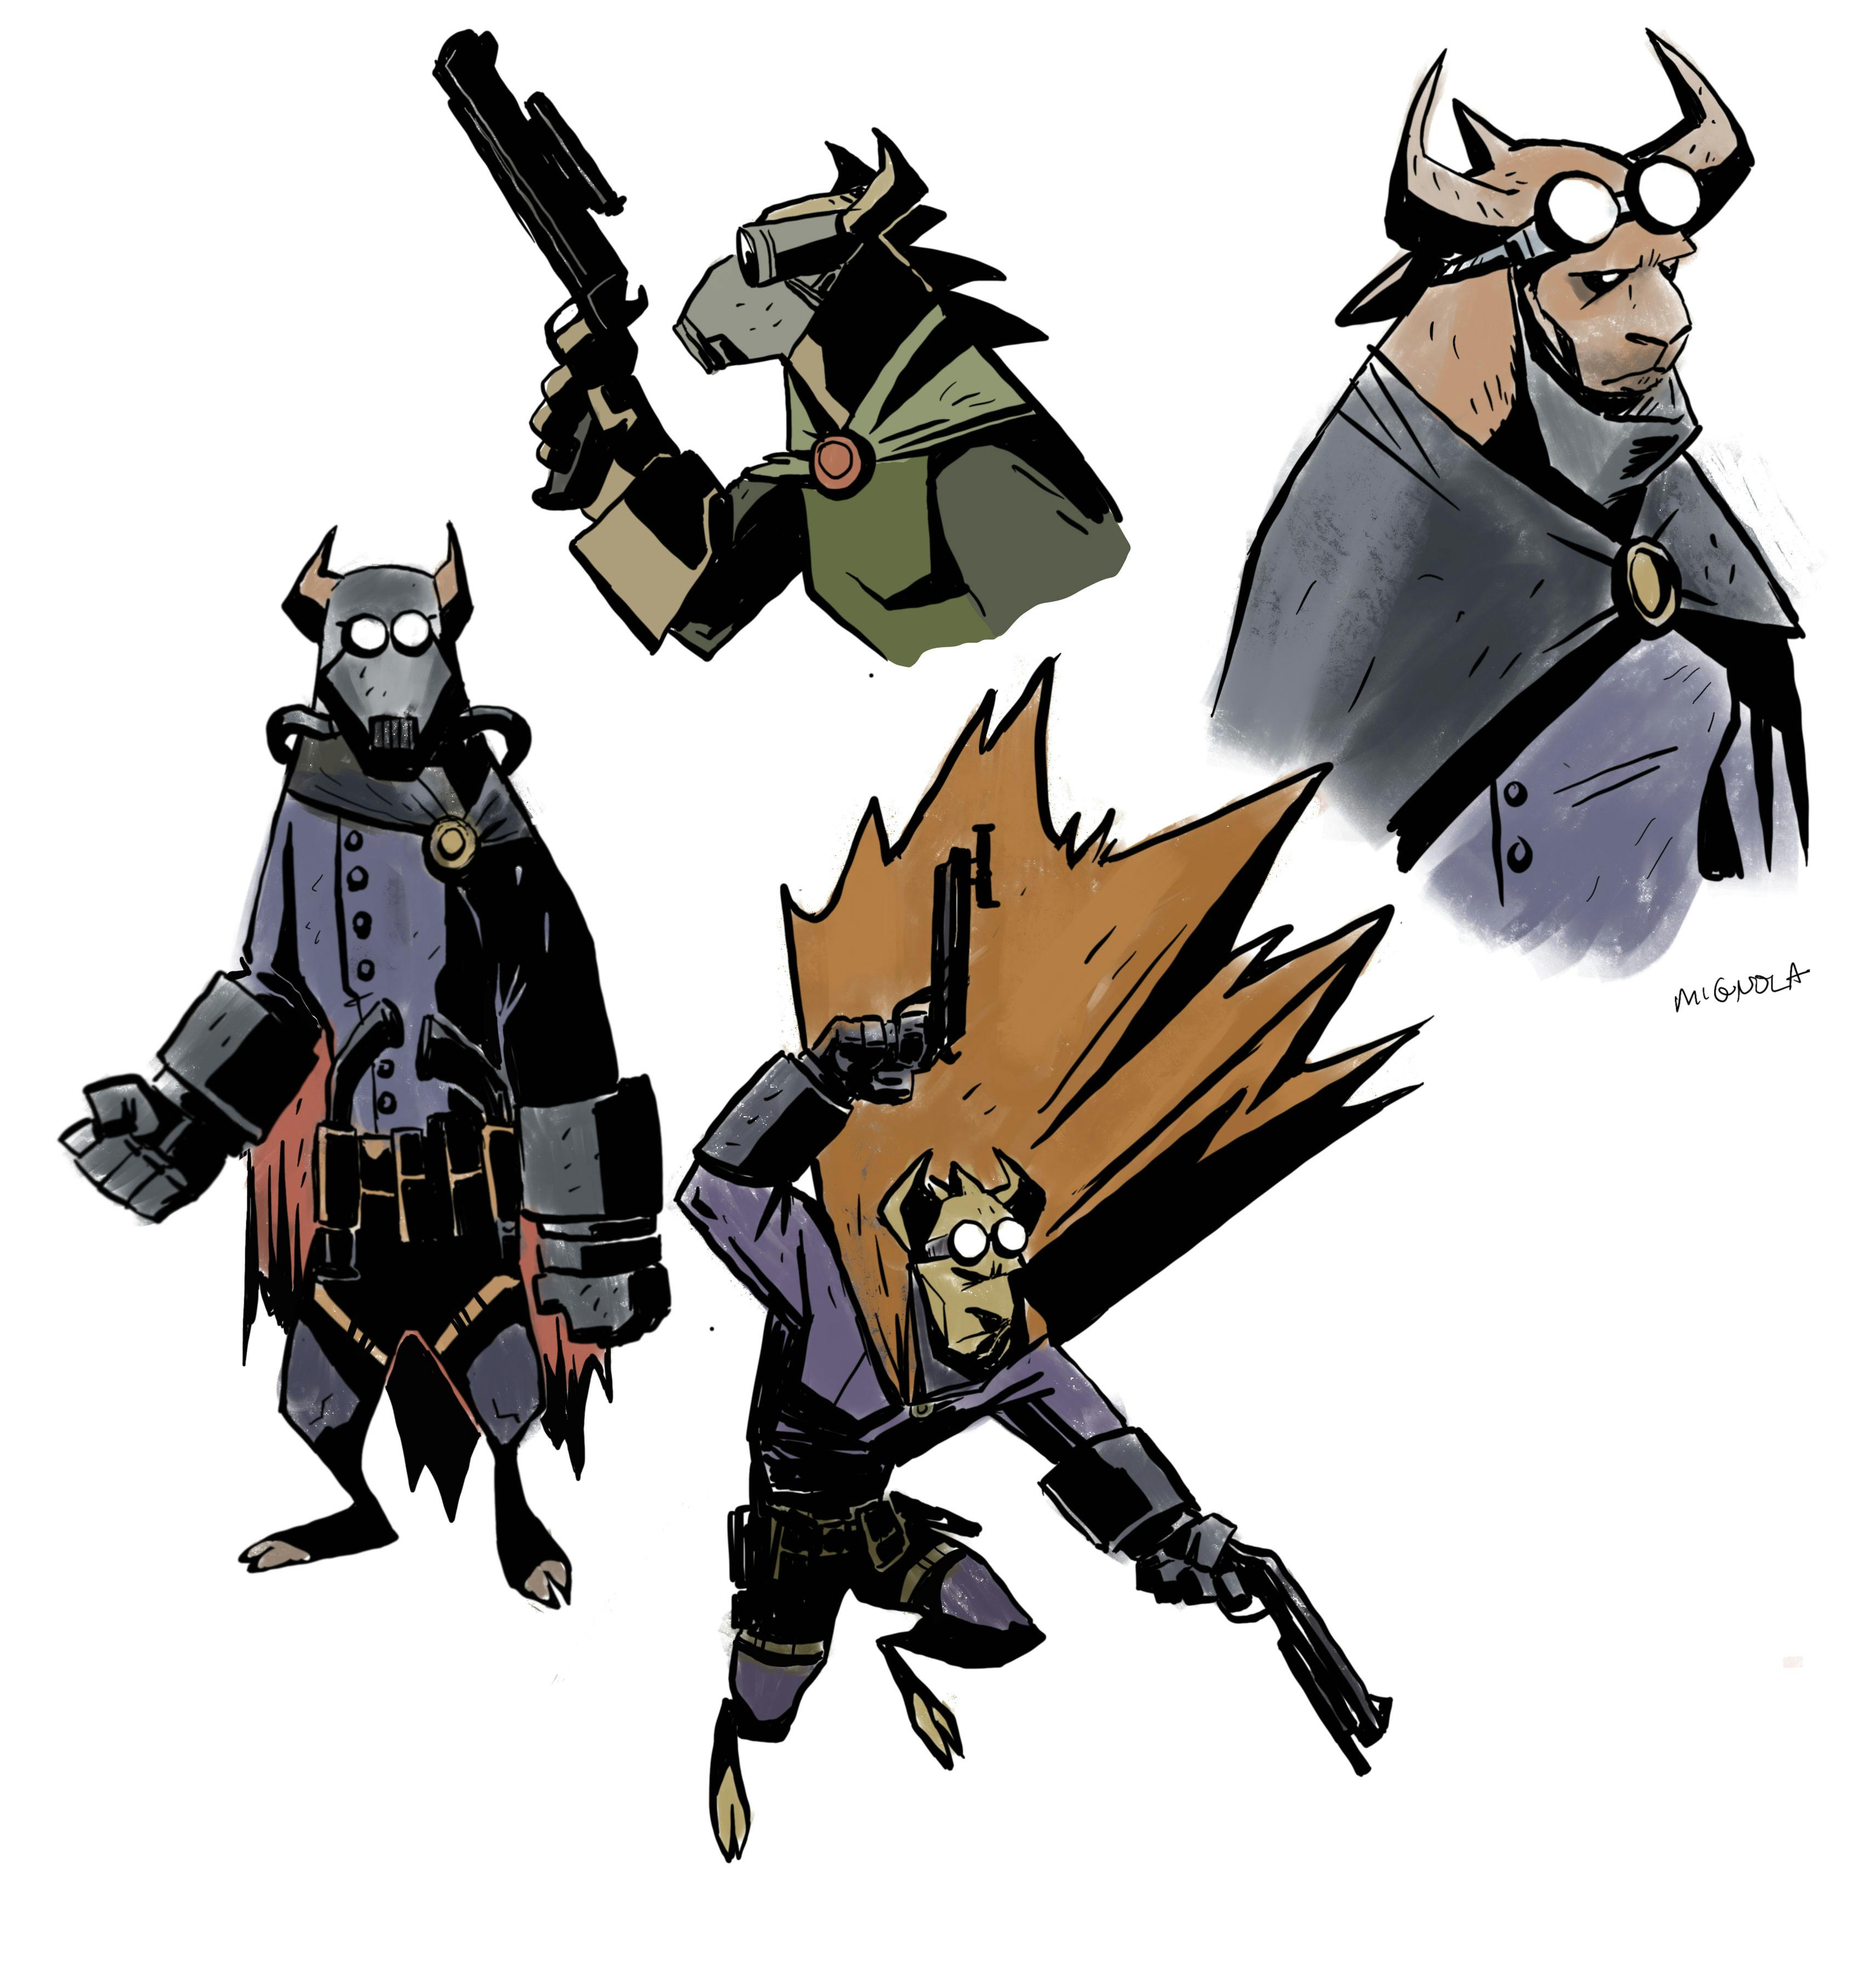 Concept art of Mike Mignola characters